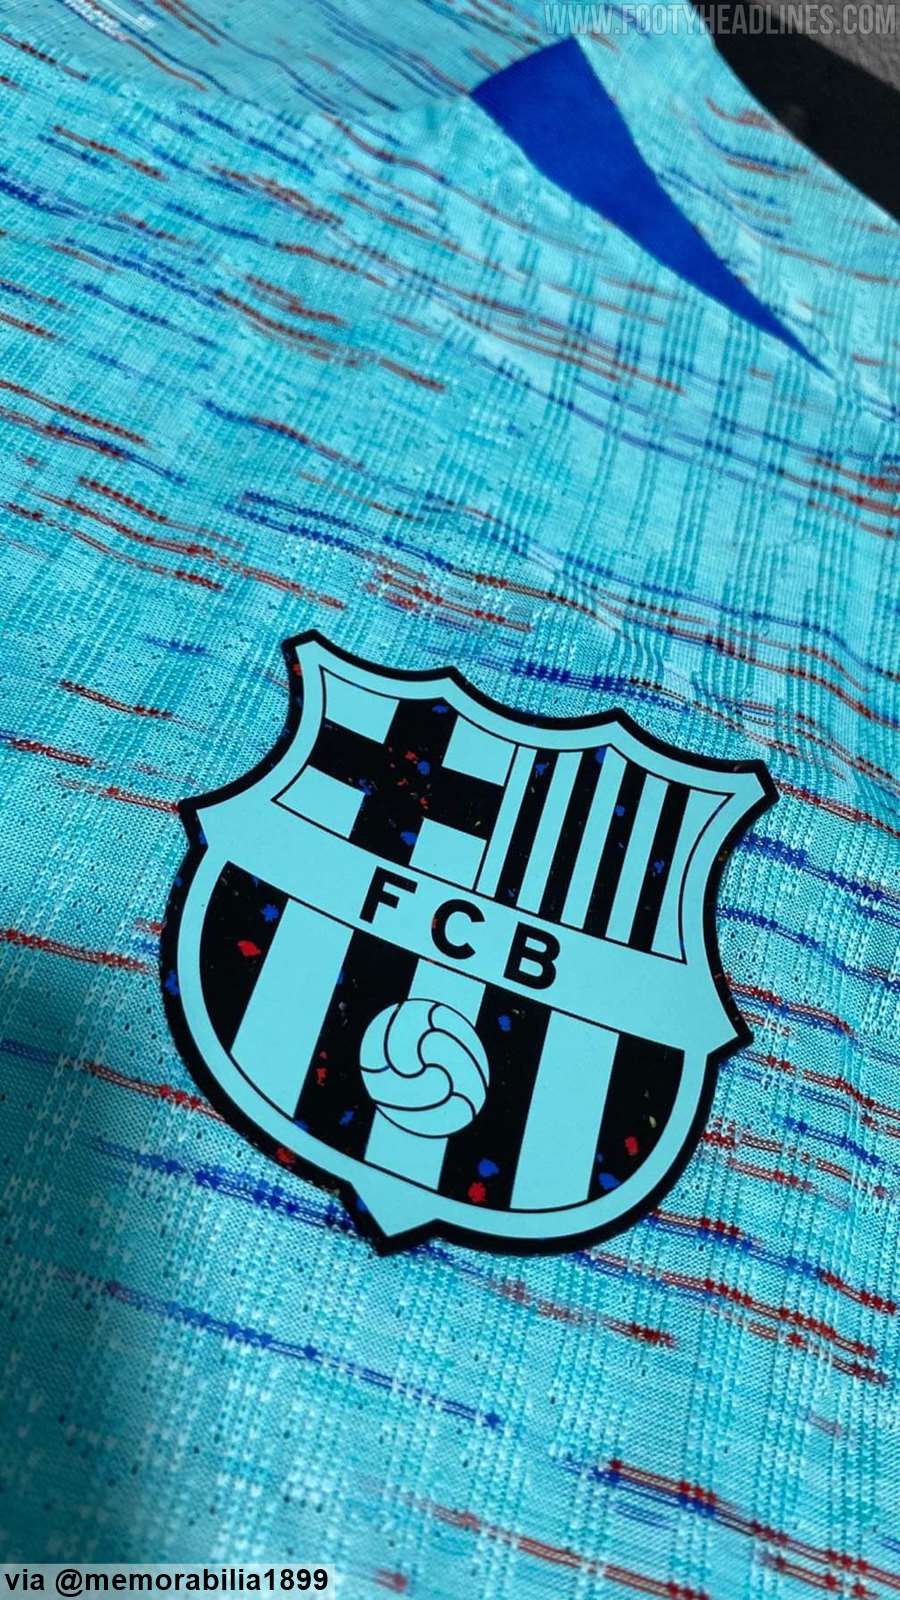 Revolutionary Barcelona To Have Three Unique Logos In The